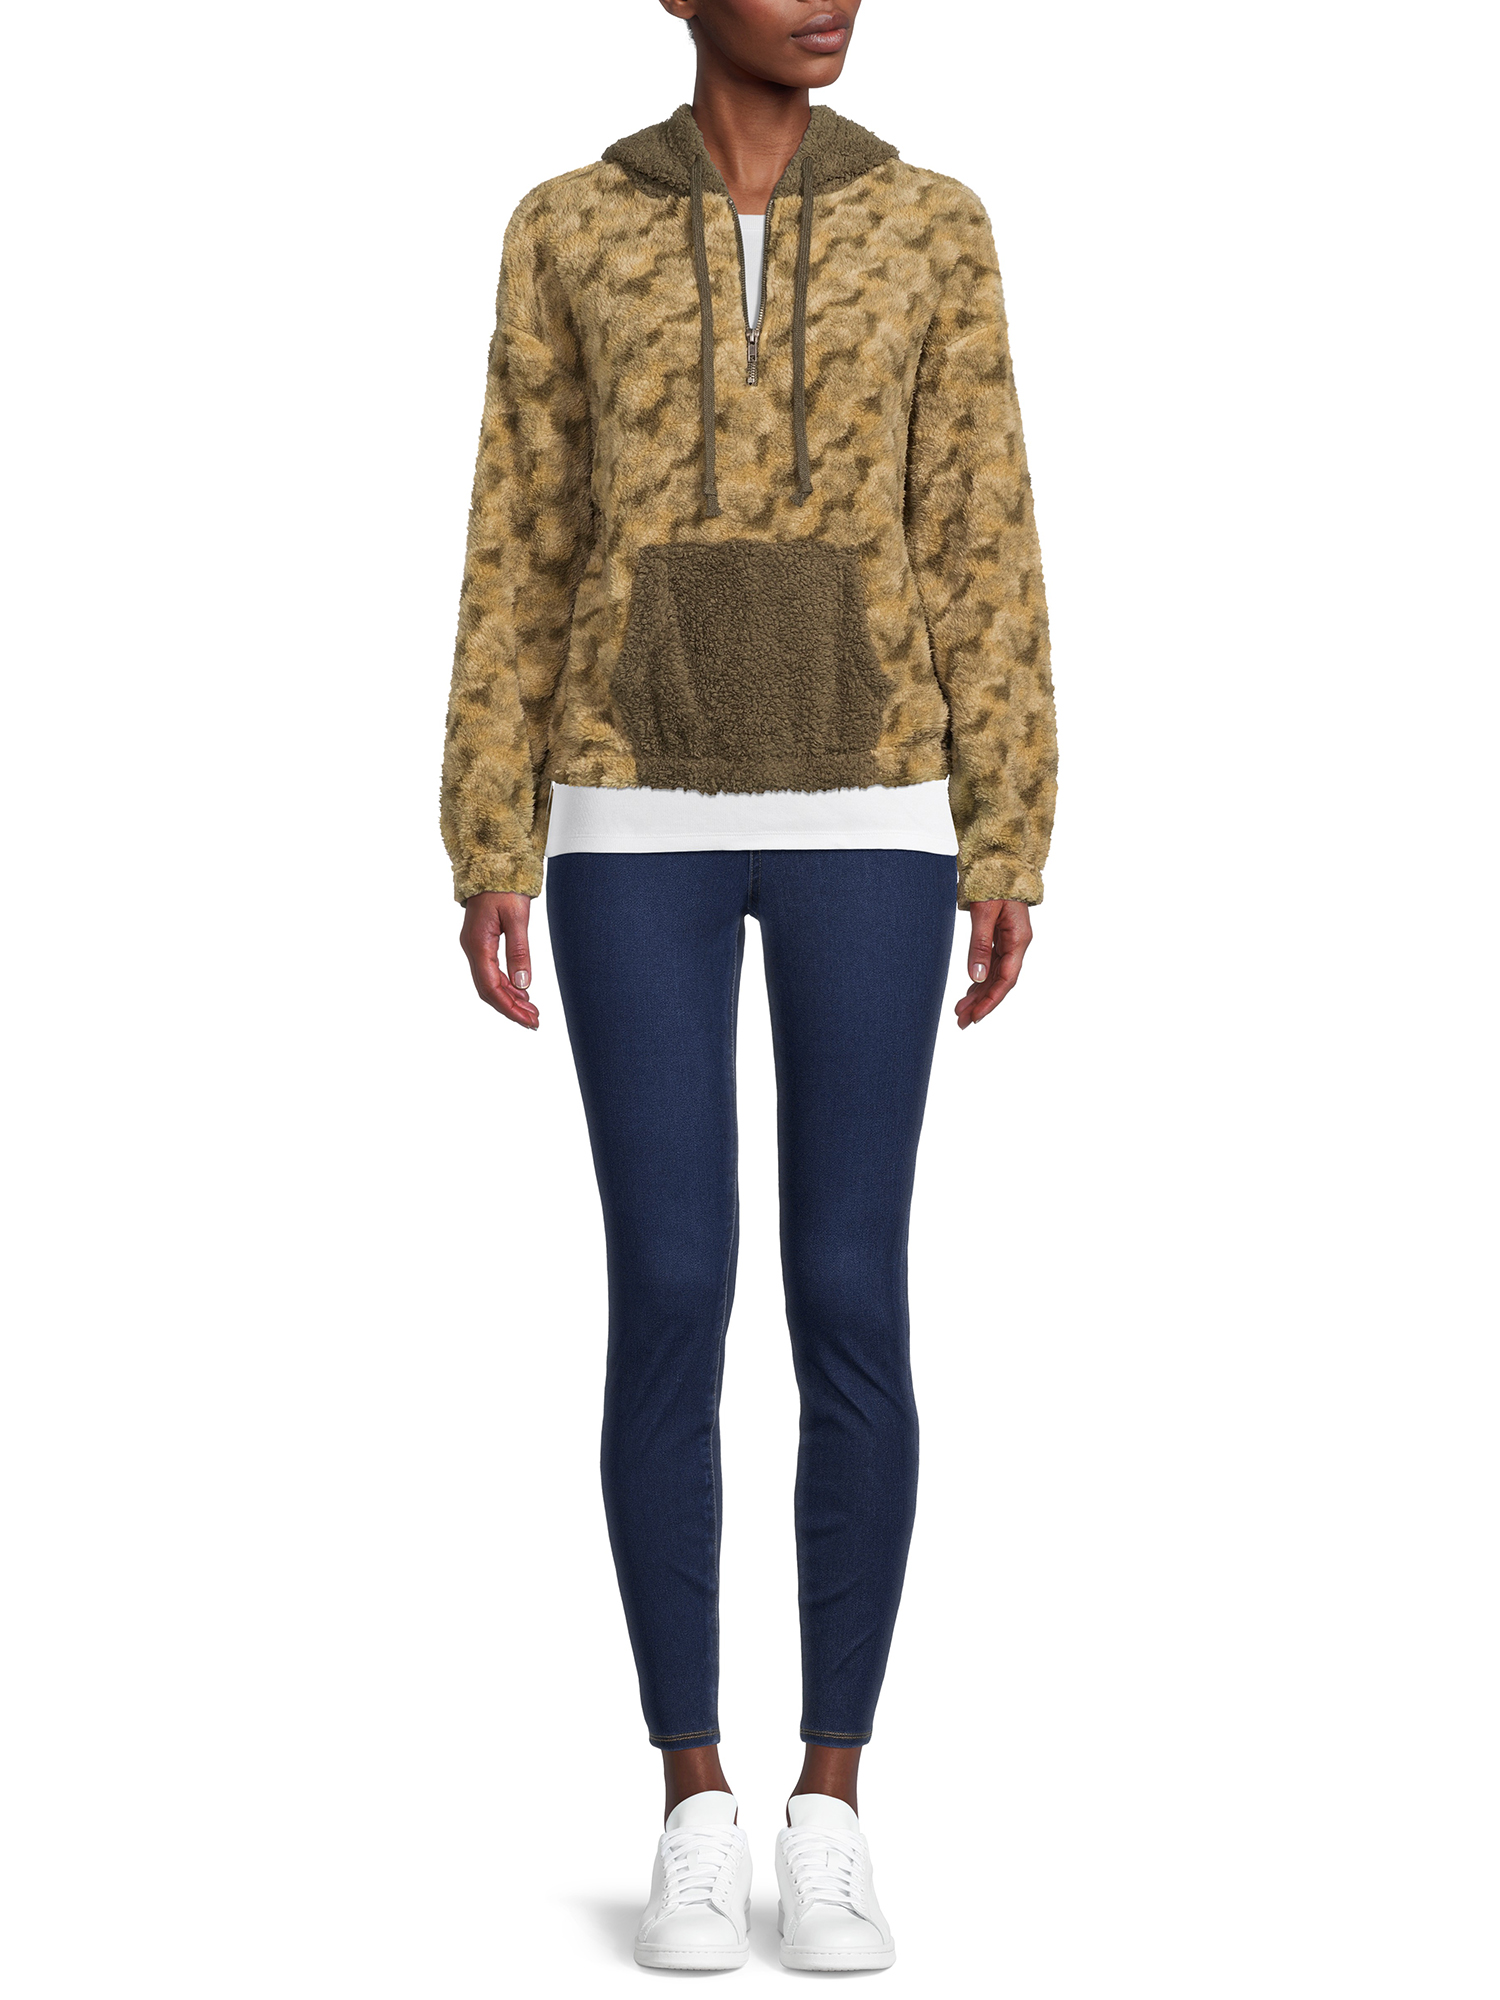 Como Blu Women's Athleisure Printed Baby Faux Sherpa Pullover - image 2 of 5